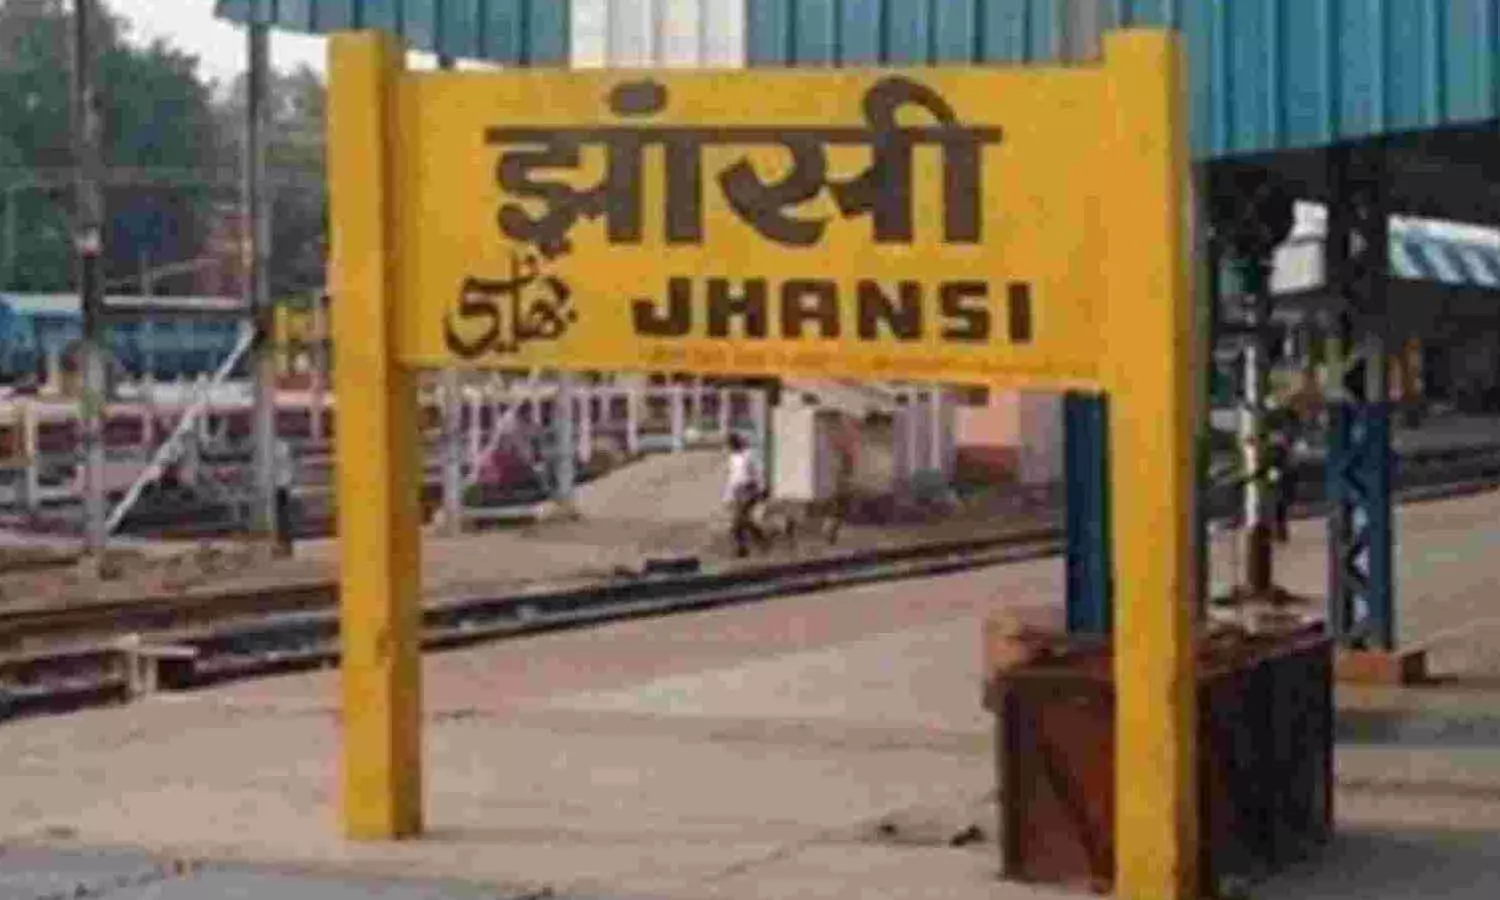 Danish assailant, who killed a minor girl in Jhansi, was arrested and sent to jail